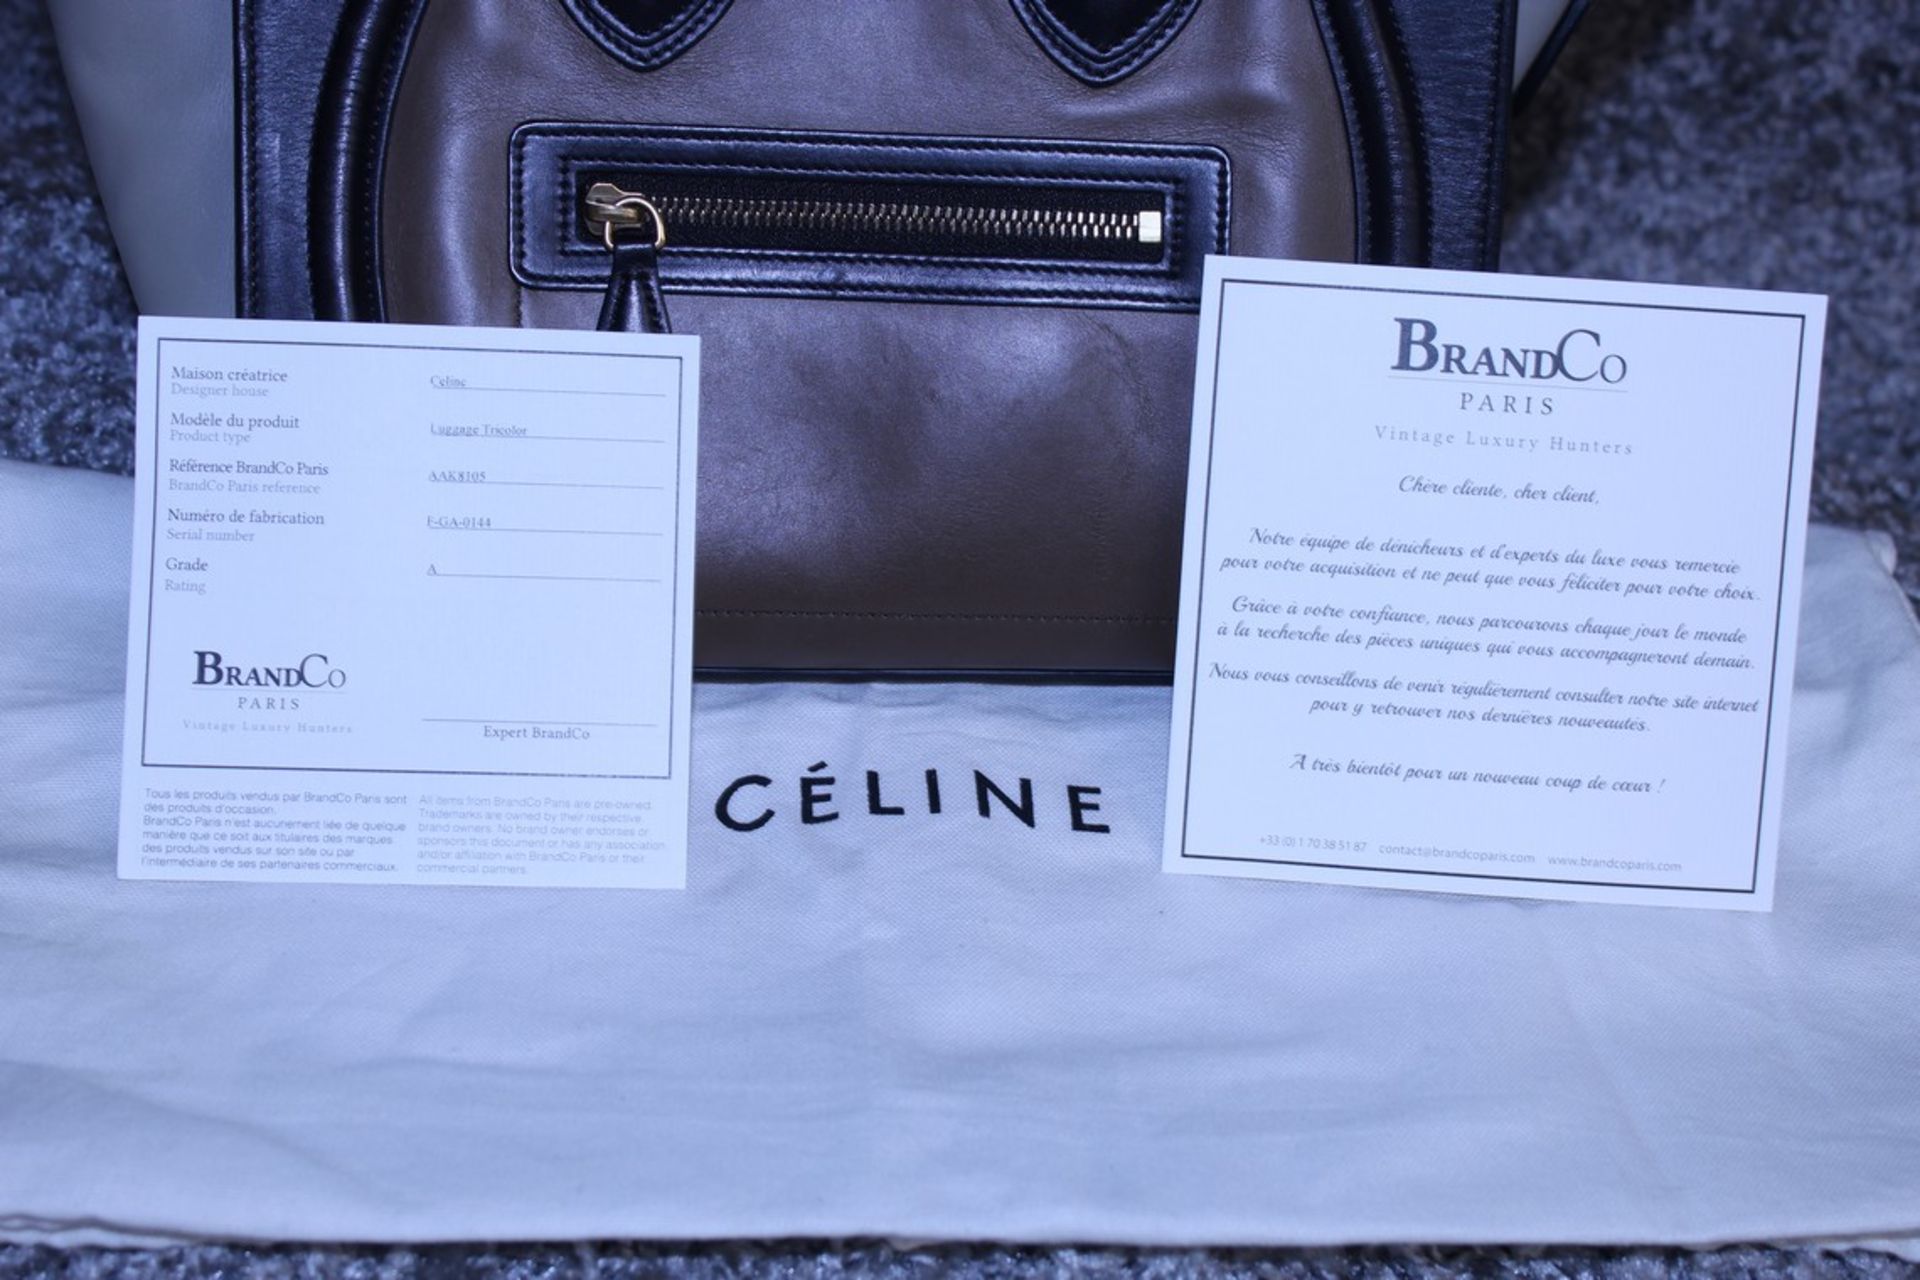 RRP £1,500 Celine Luggage Tricol Handbag, Céline 'Mini Luggage'. Open Swith A Zipper On Top And Is - Image 5 of 5